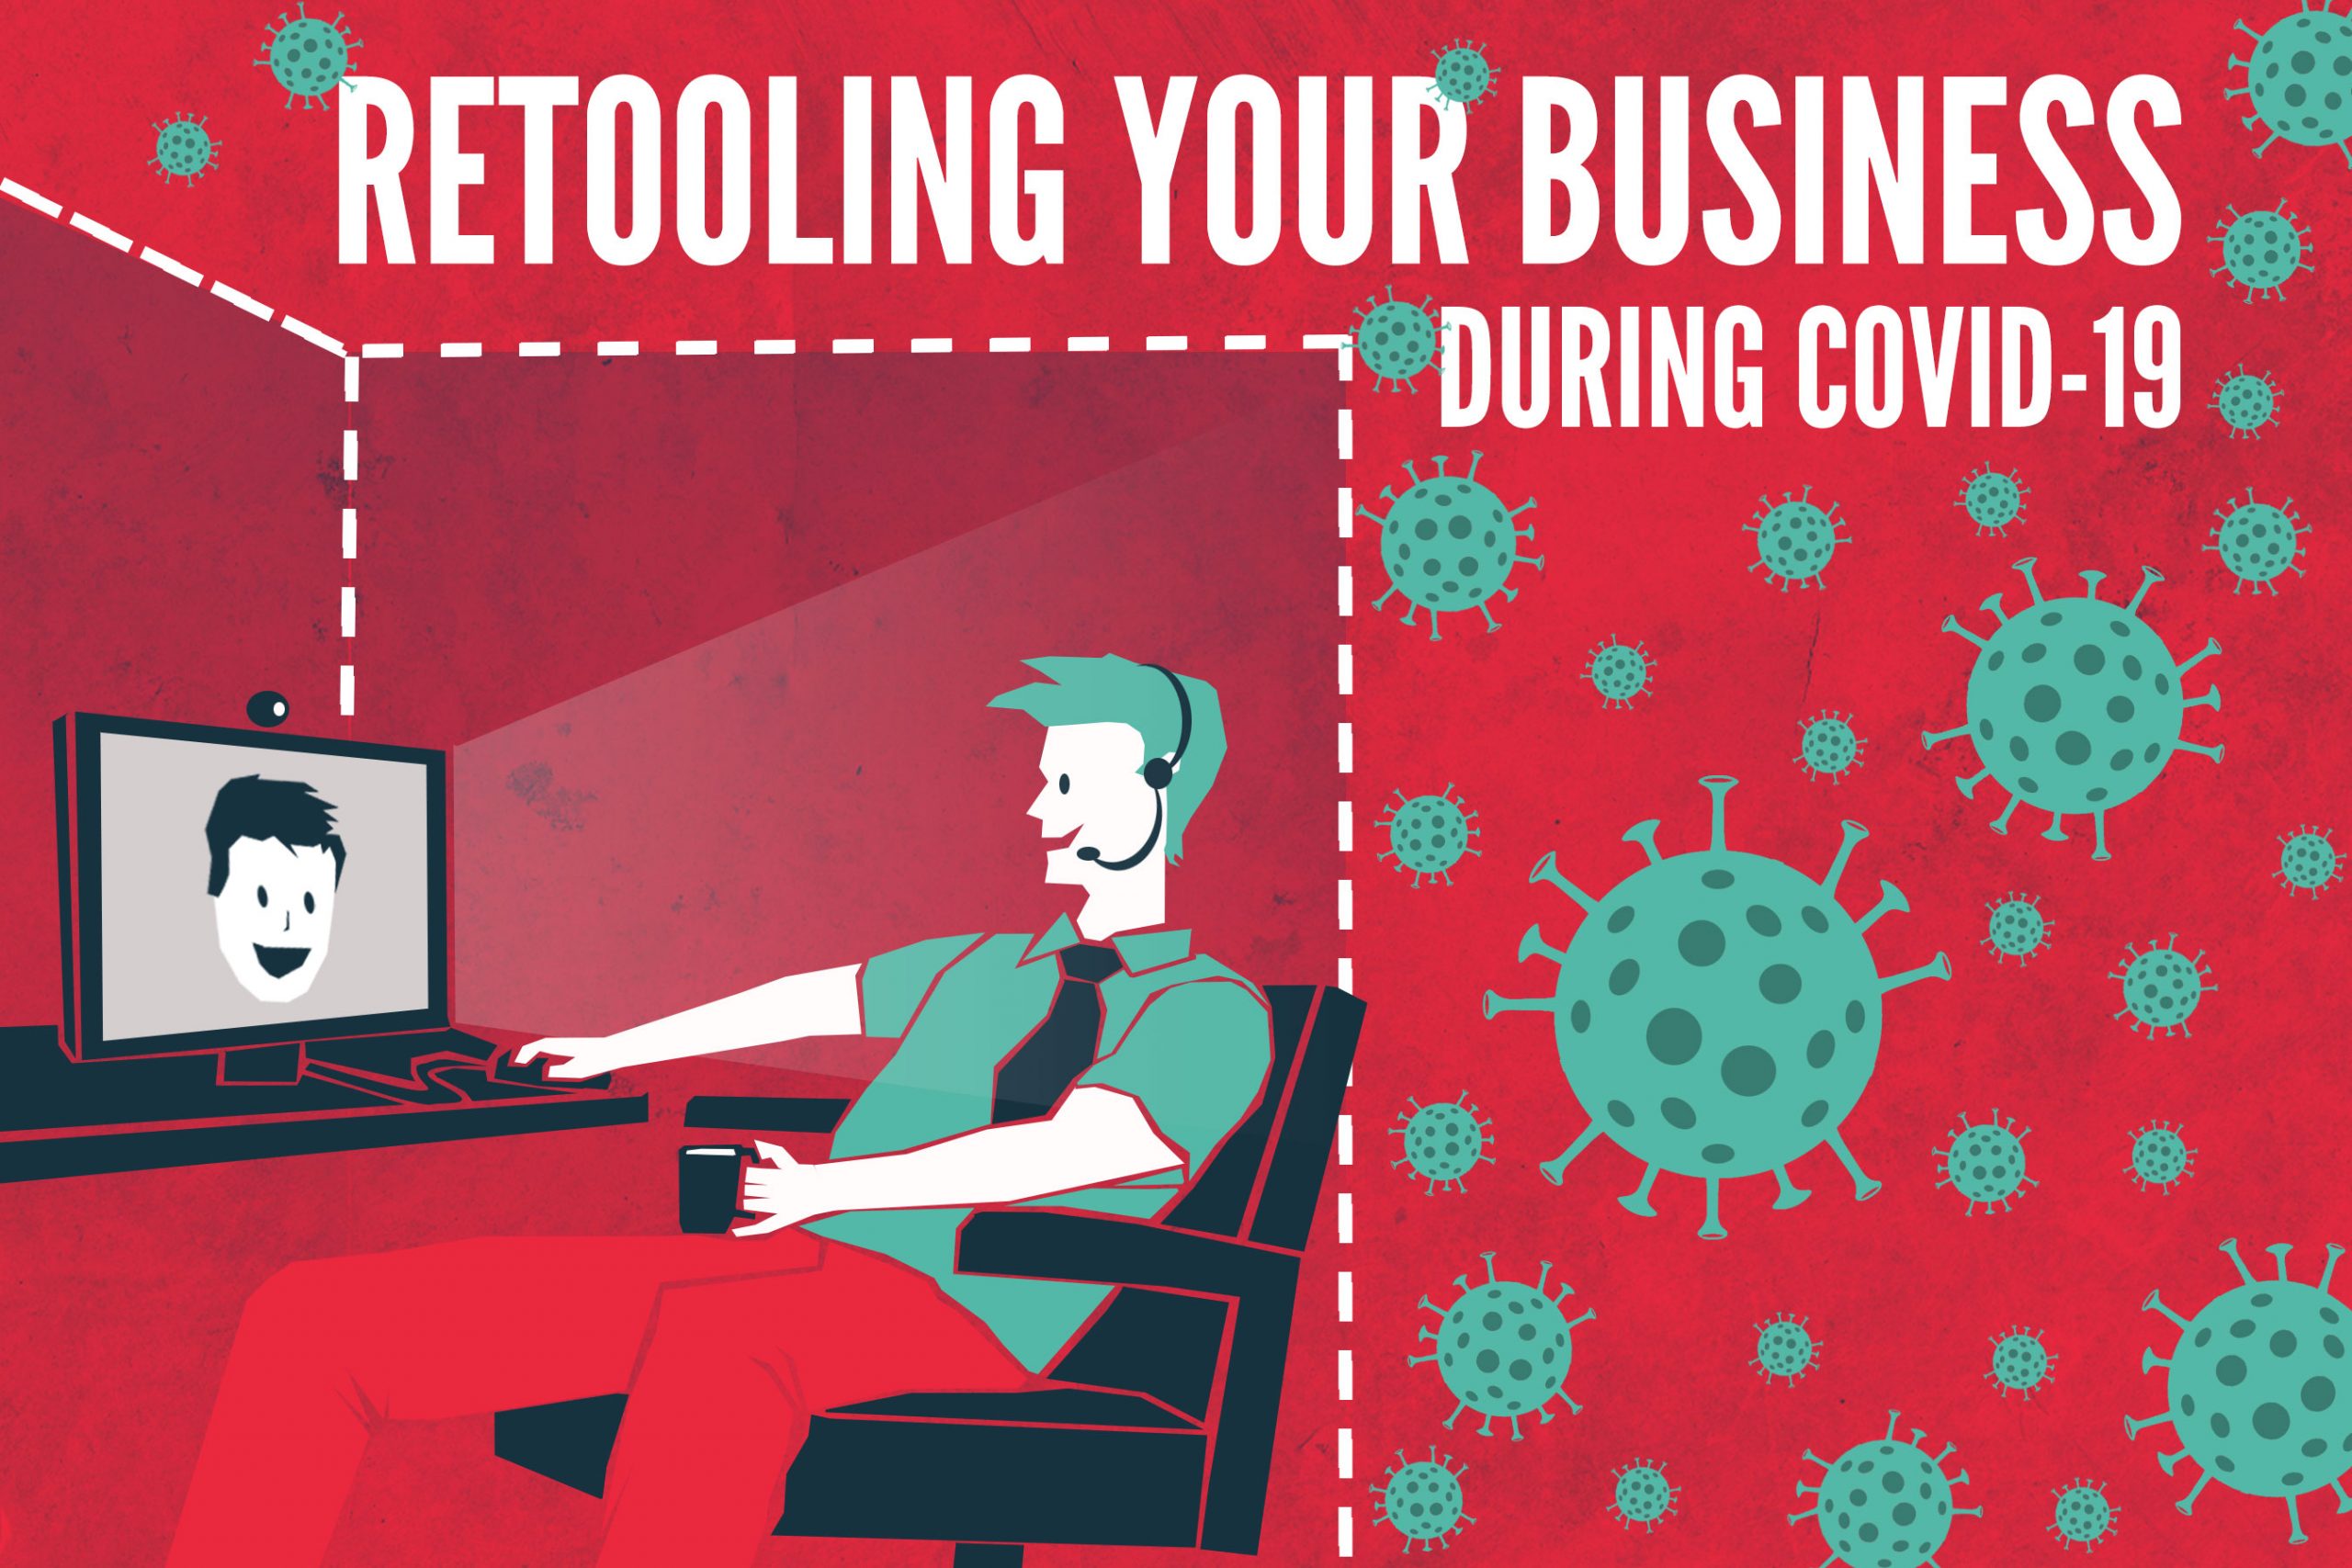 Tips for retooling your business for COVID-19